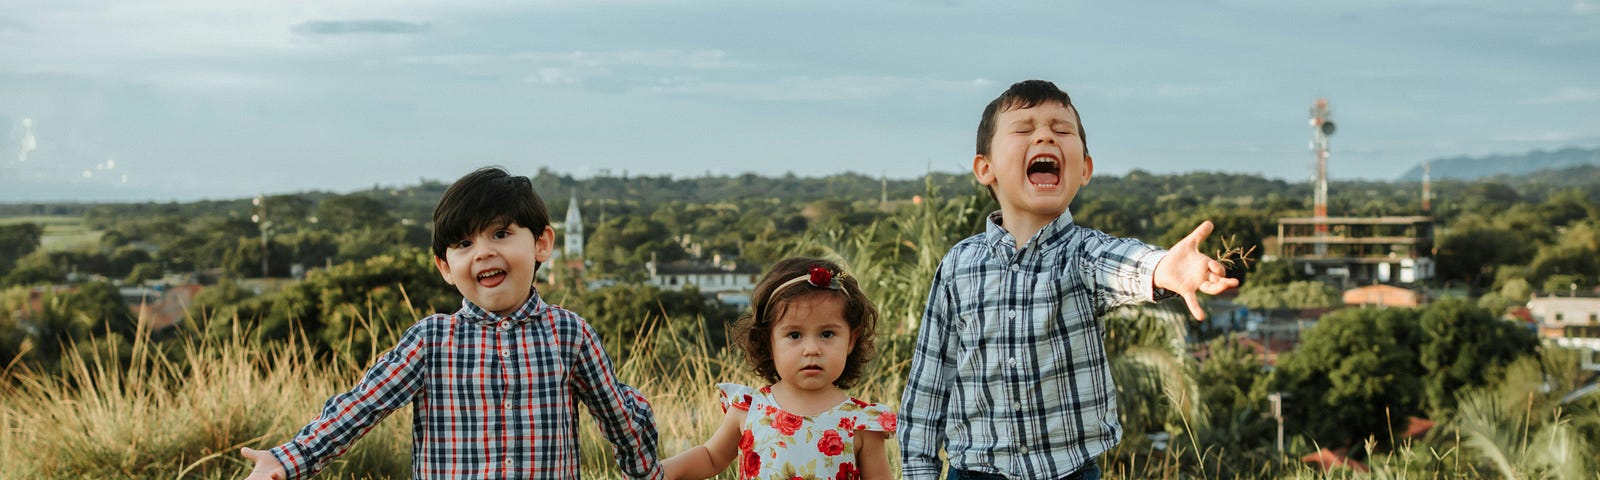 Photo by Catalina Carvajal Herrera: https://www.pexels.com/photo/children-standing-on-grass-for-a-family-picture-13247076/